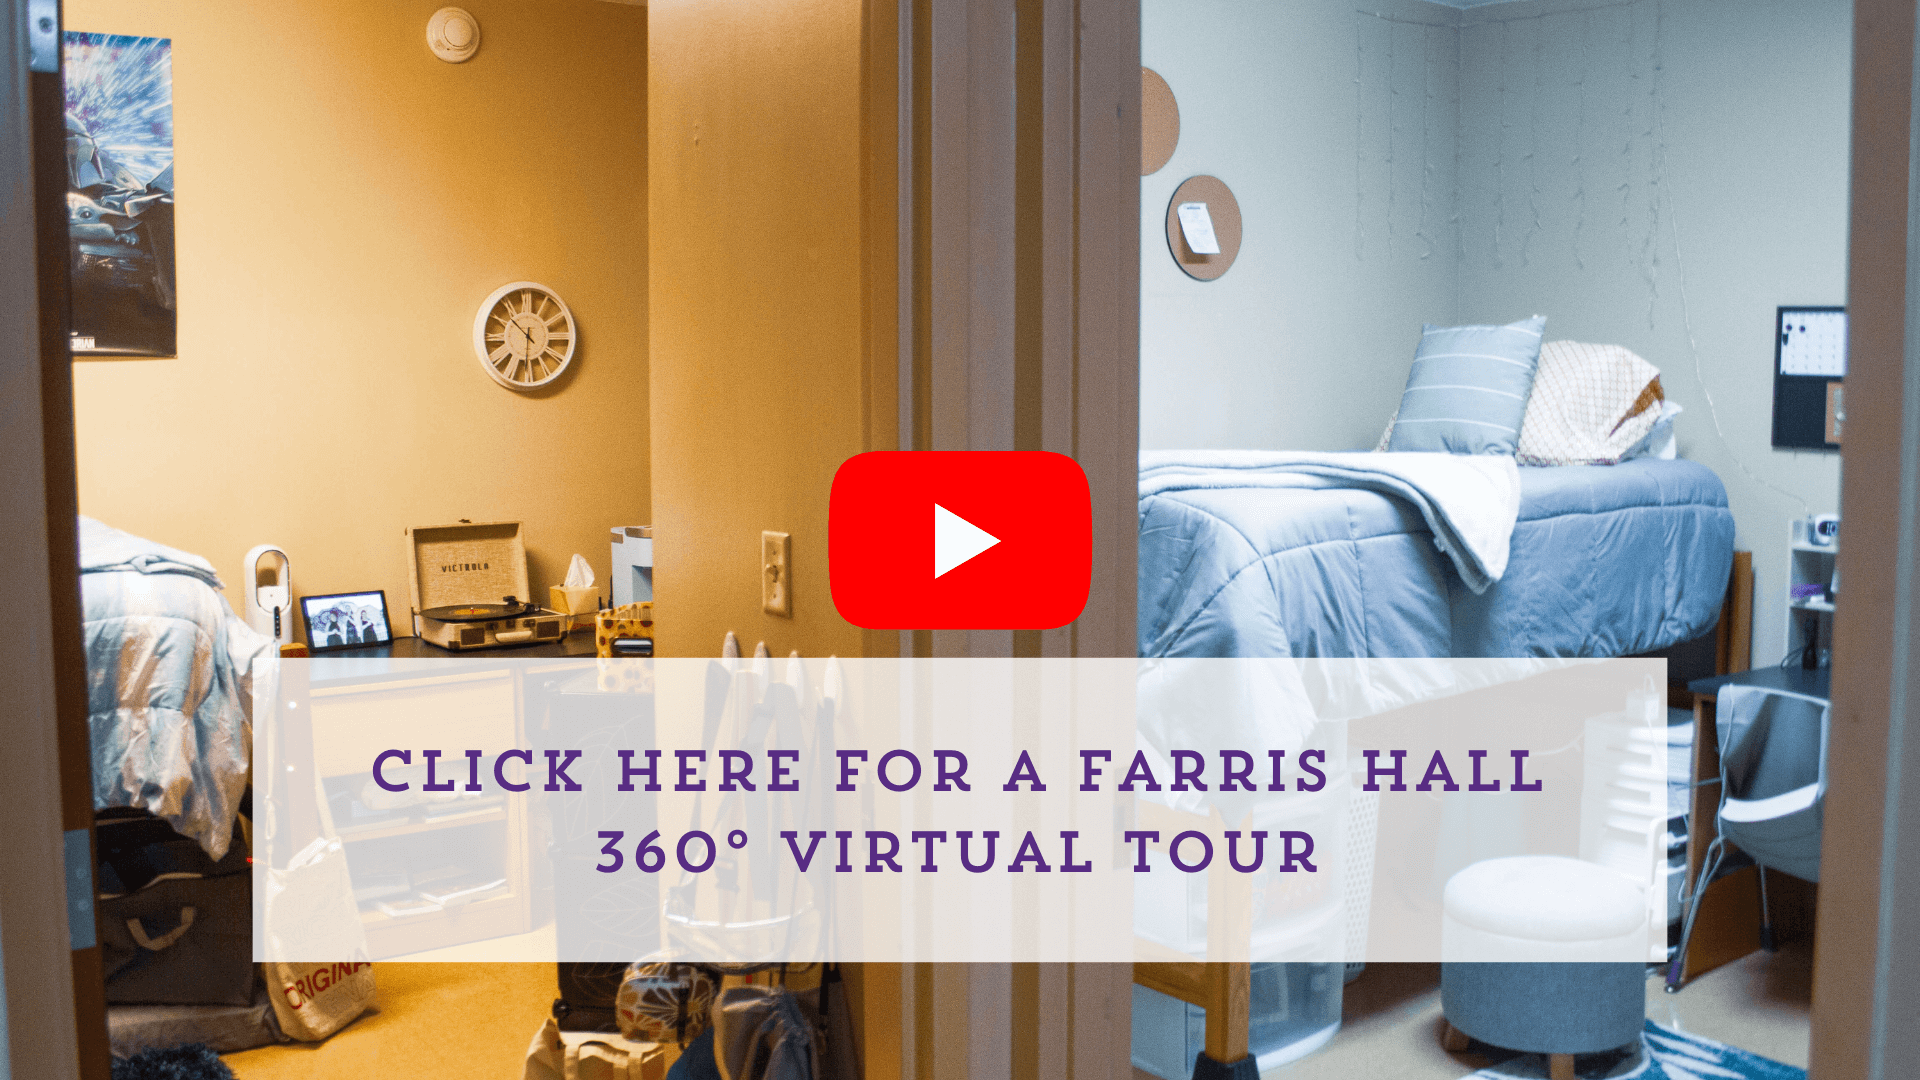 alt text: click here for a farris hall 360 degree virtual tour